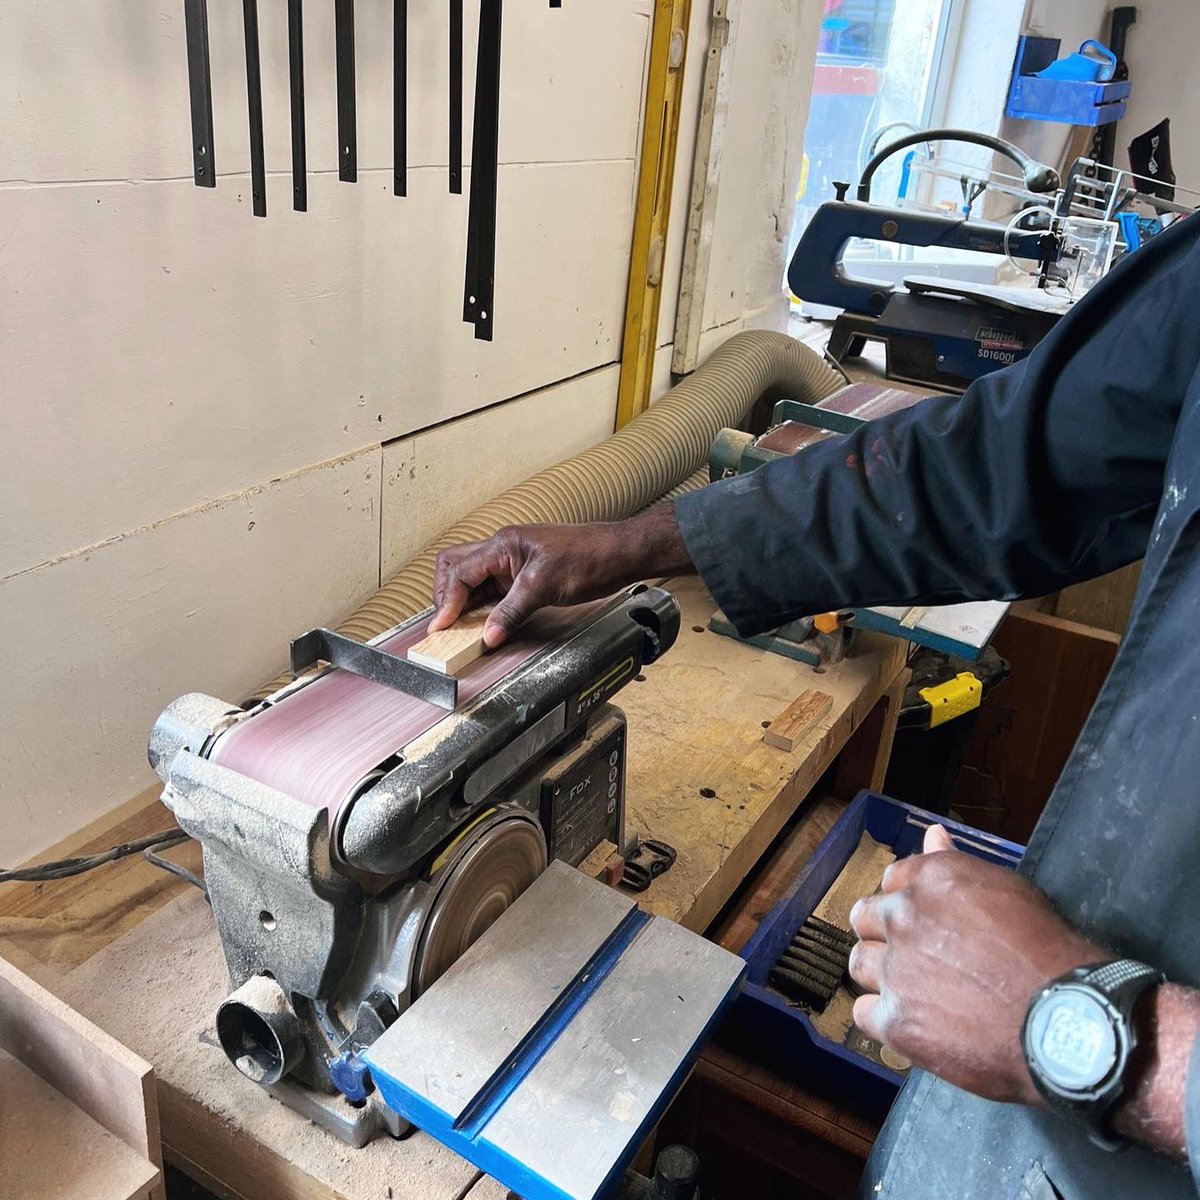 At the YLP, our students learn in professional environments with high quality tools and equipment, guided by our team of supportive and knowledgeable tutors.   We love seeing our students’ creativity and individuality in their work - we can’t wait to see the finished product 👏🏽